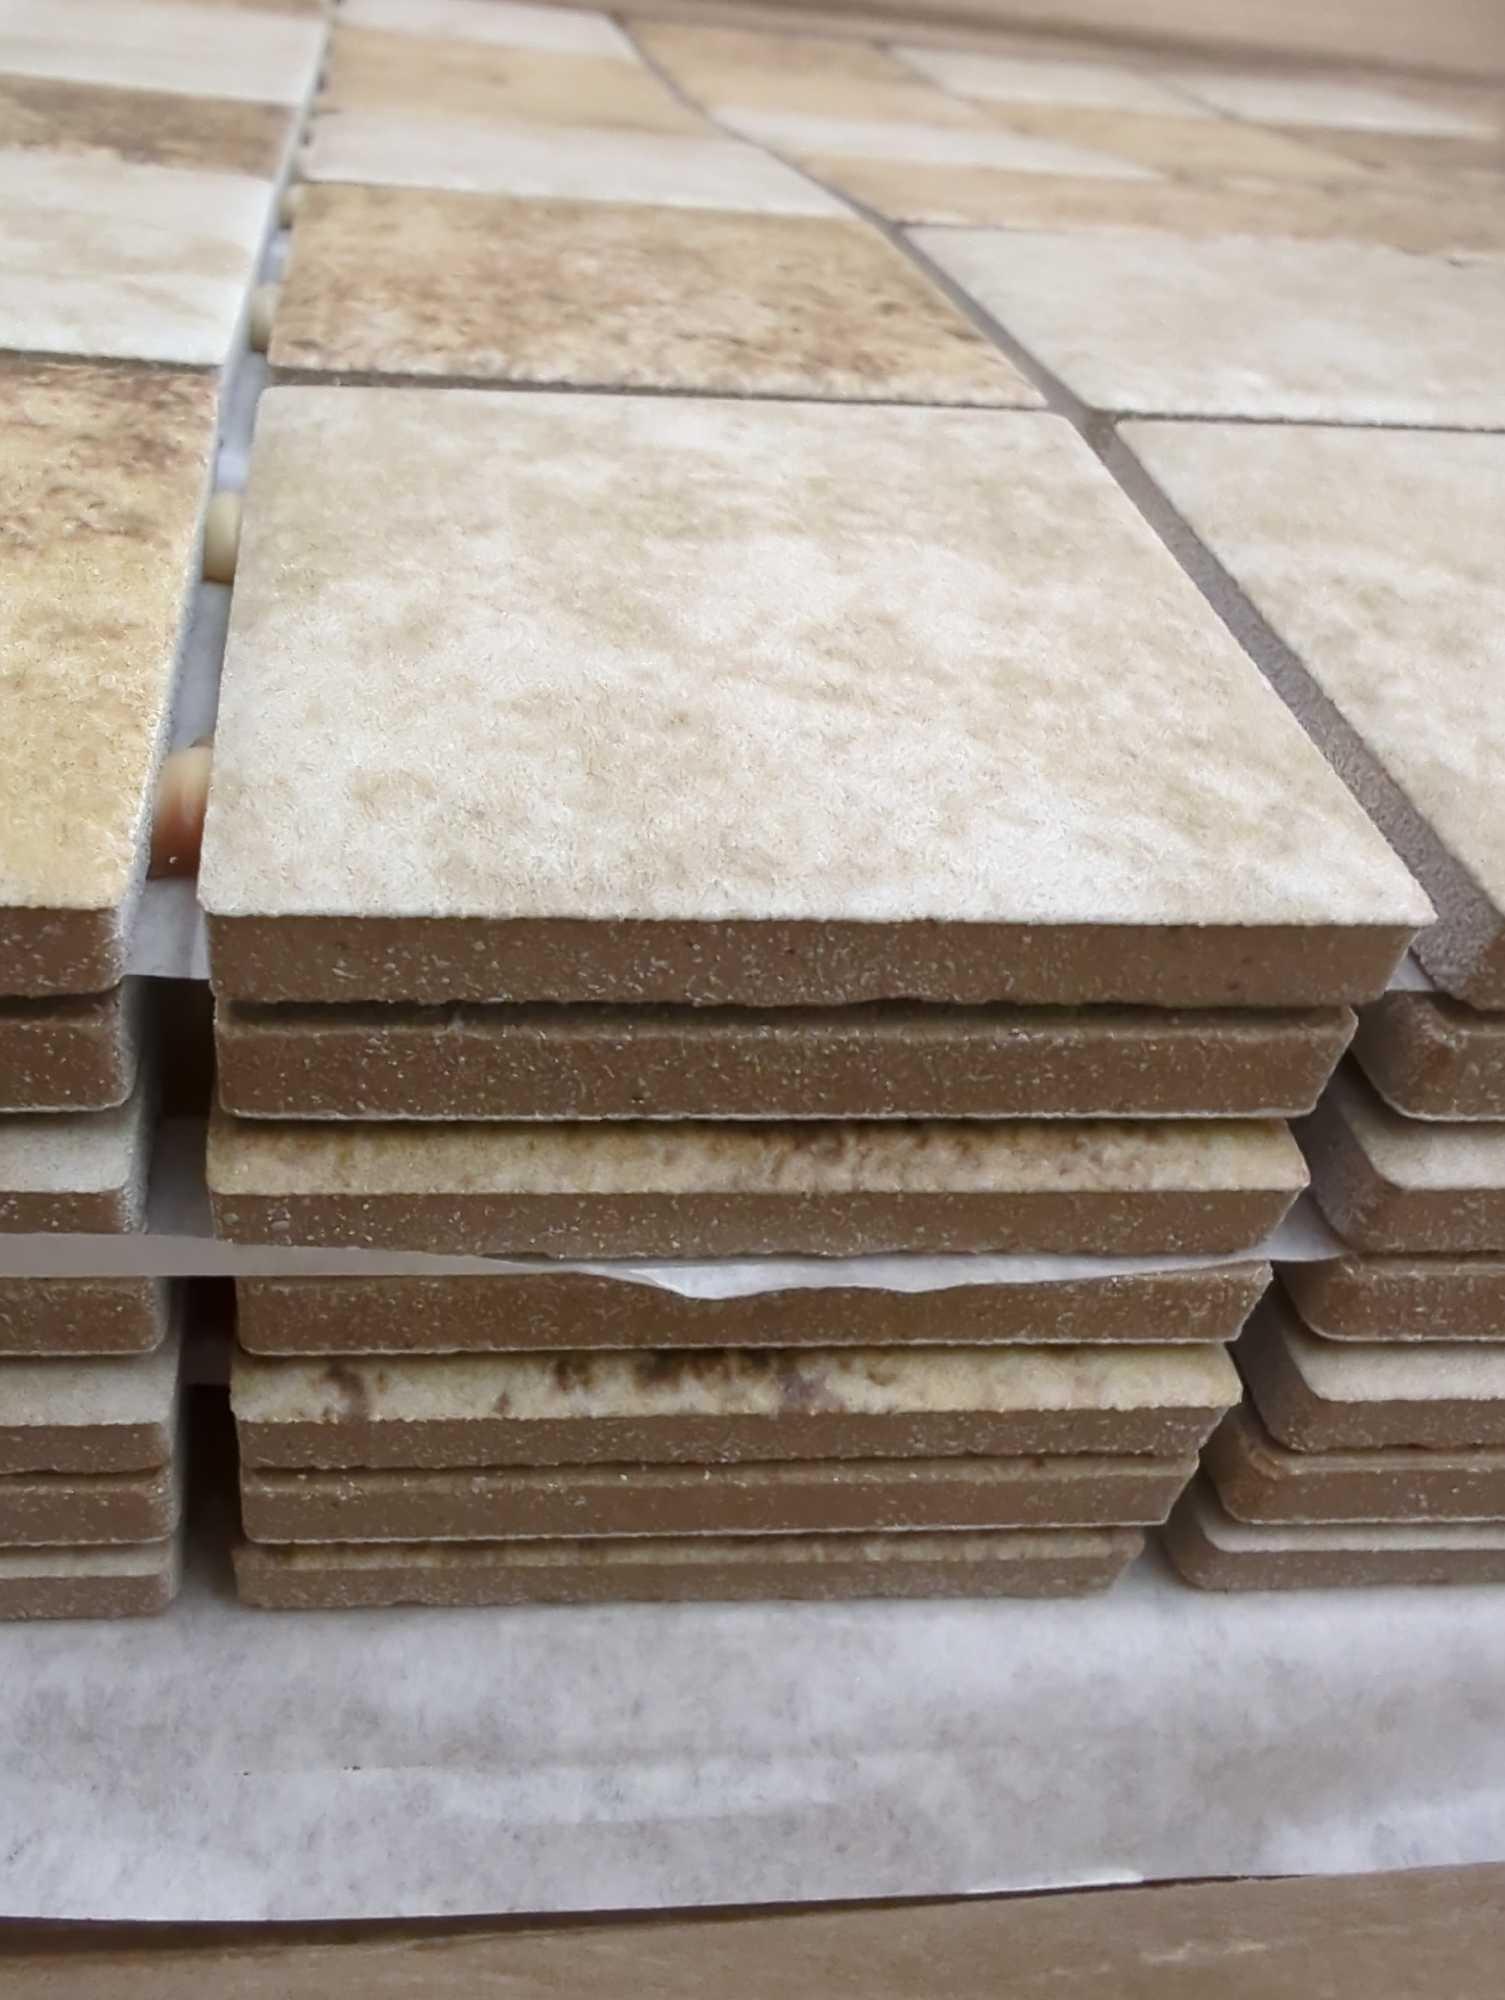 Lot of 2 casesDaltile Rio Mesa Desert Sand 12 in. x 12 in. x 6 mm Ceramic Mosaic Floor and Wall Tile